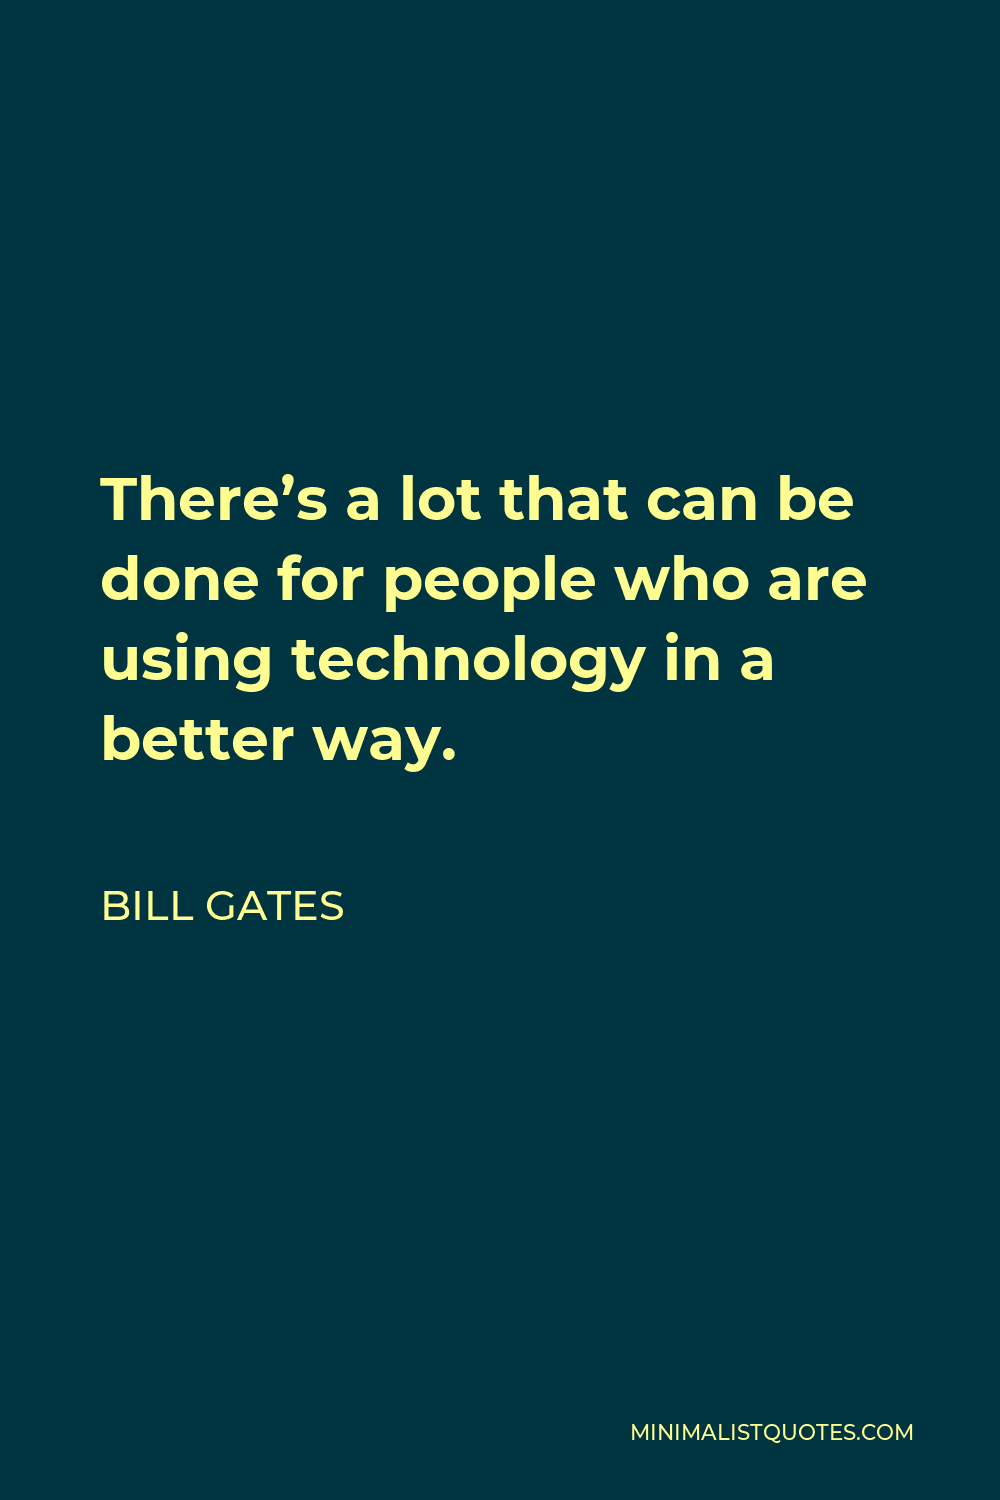 Bill Gates Quote - There’s a lot that can be done for people who are using technology in a better way.